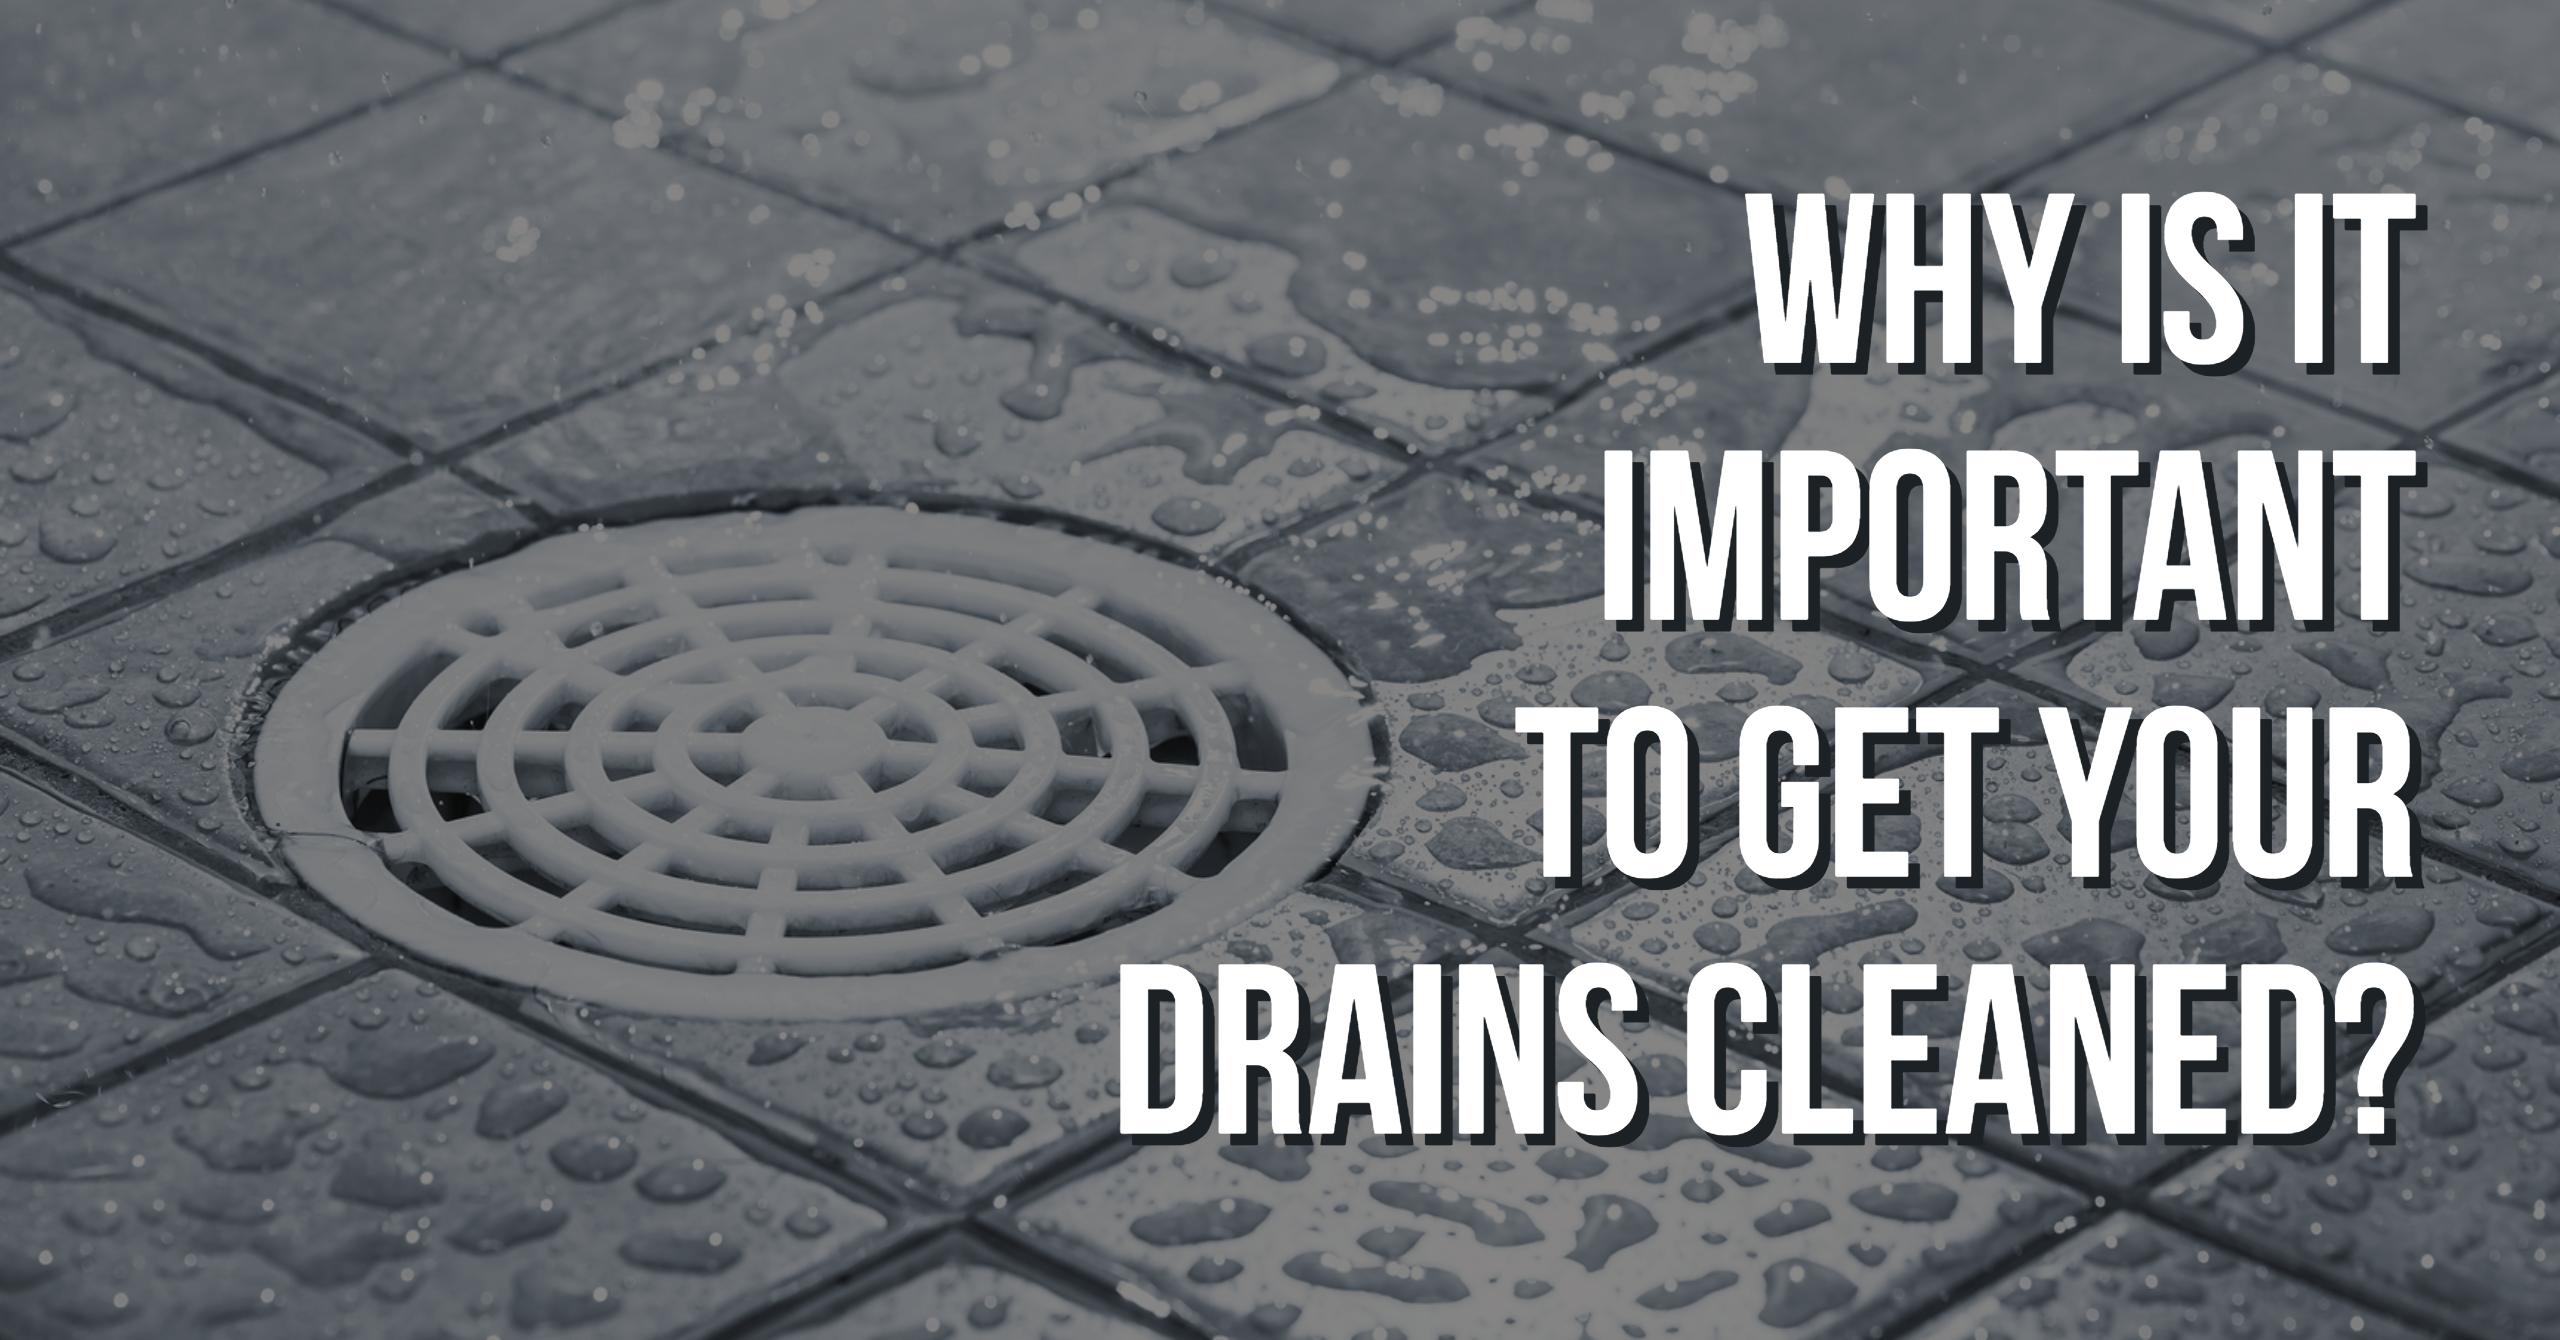 Why Is It Important to clean your drain